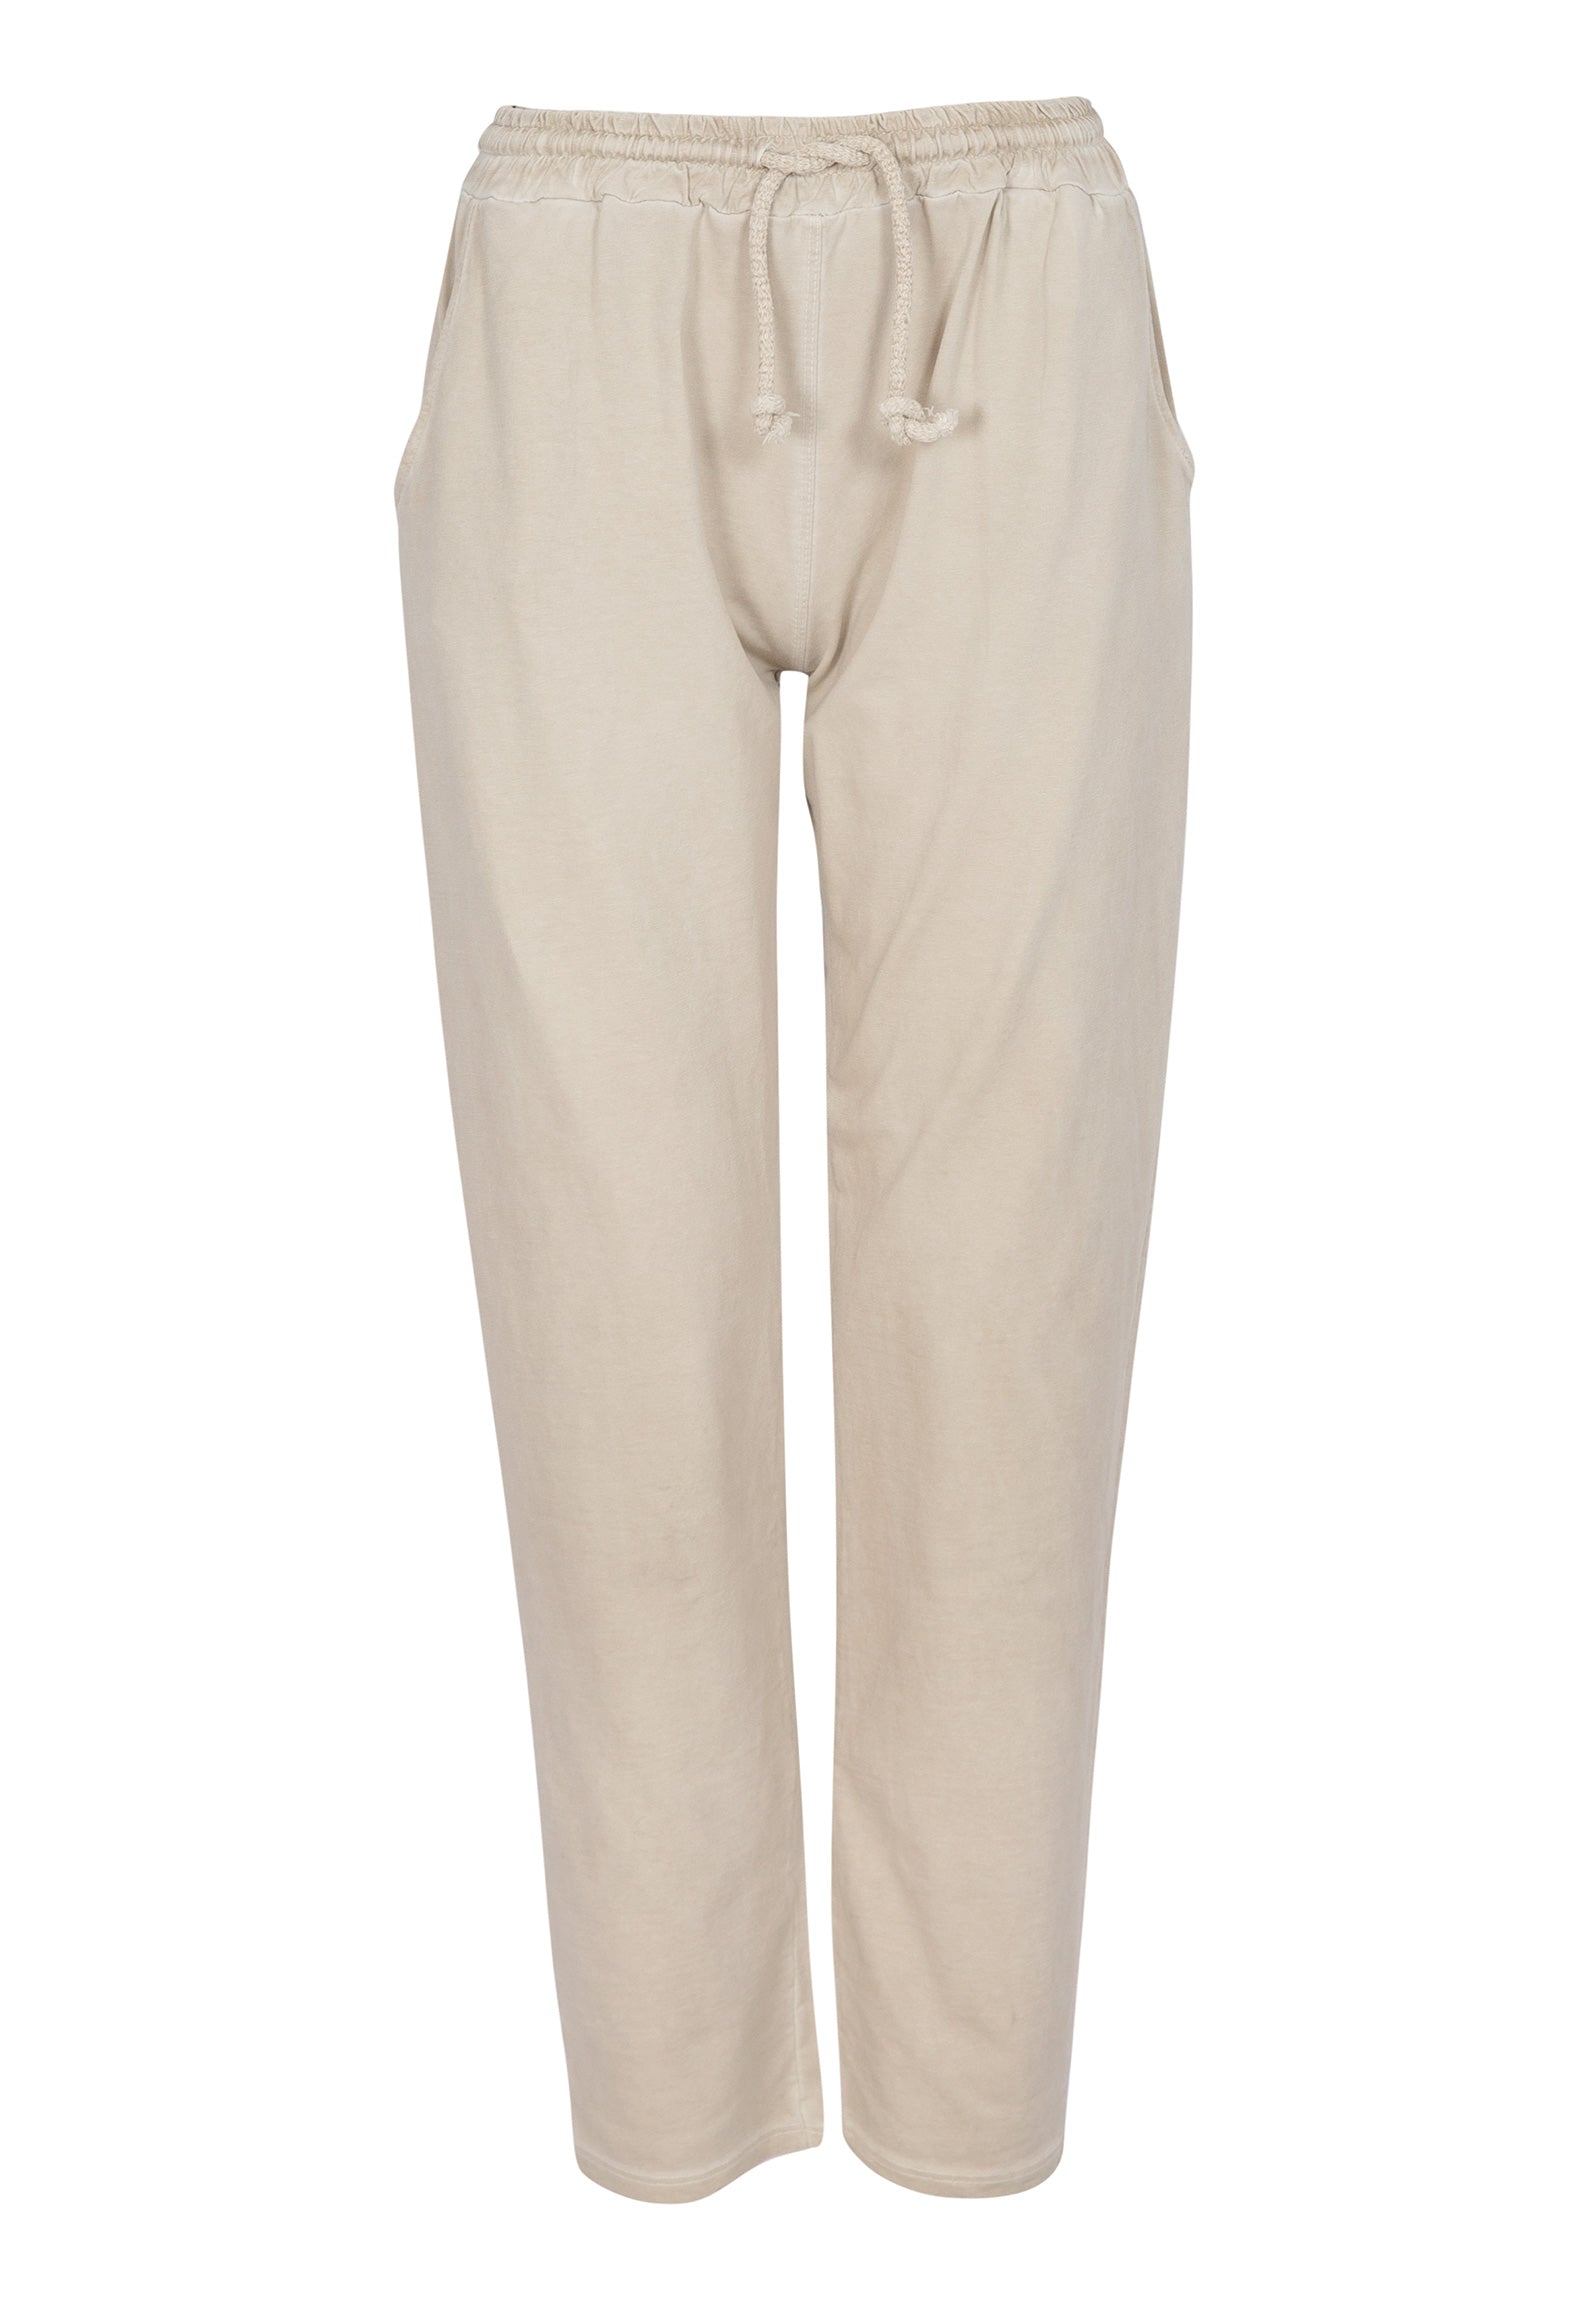 Women’s Neutrals Rya Pant Beige Extra Small By Ridley